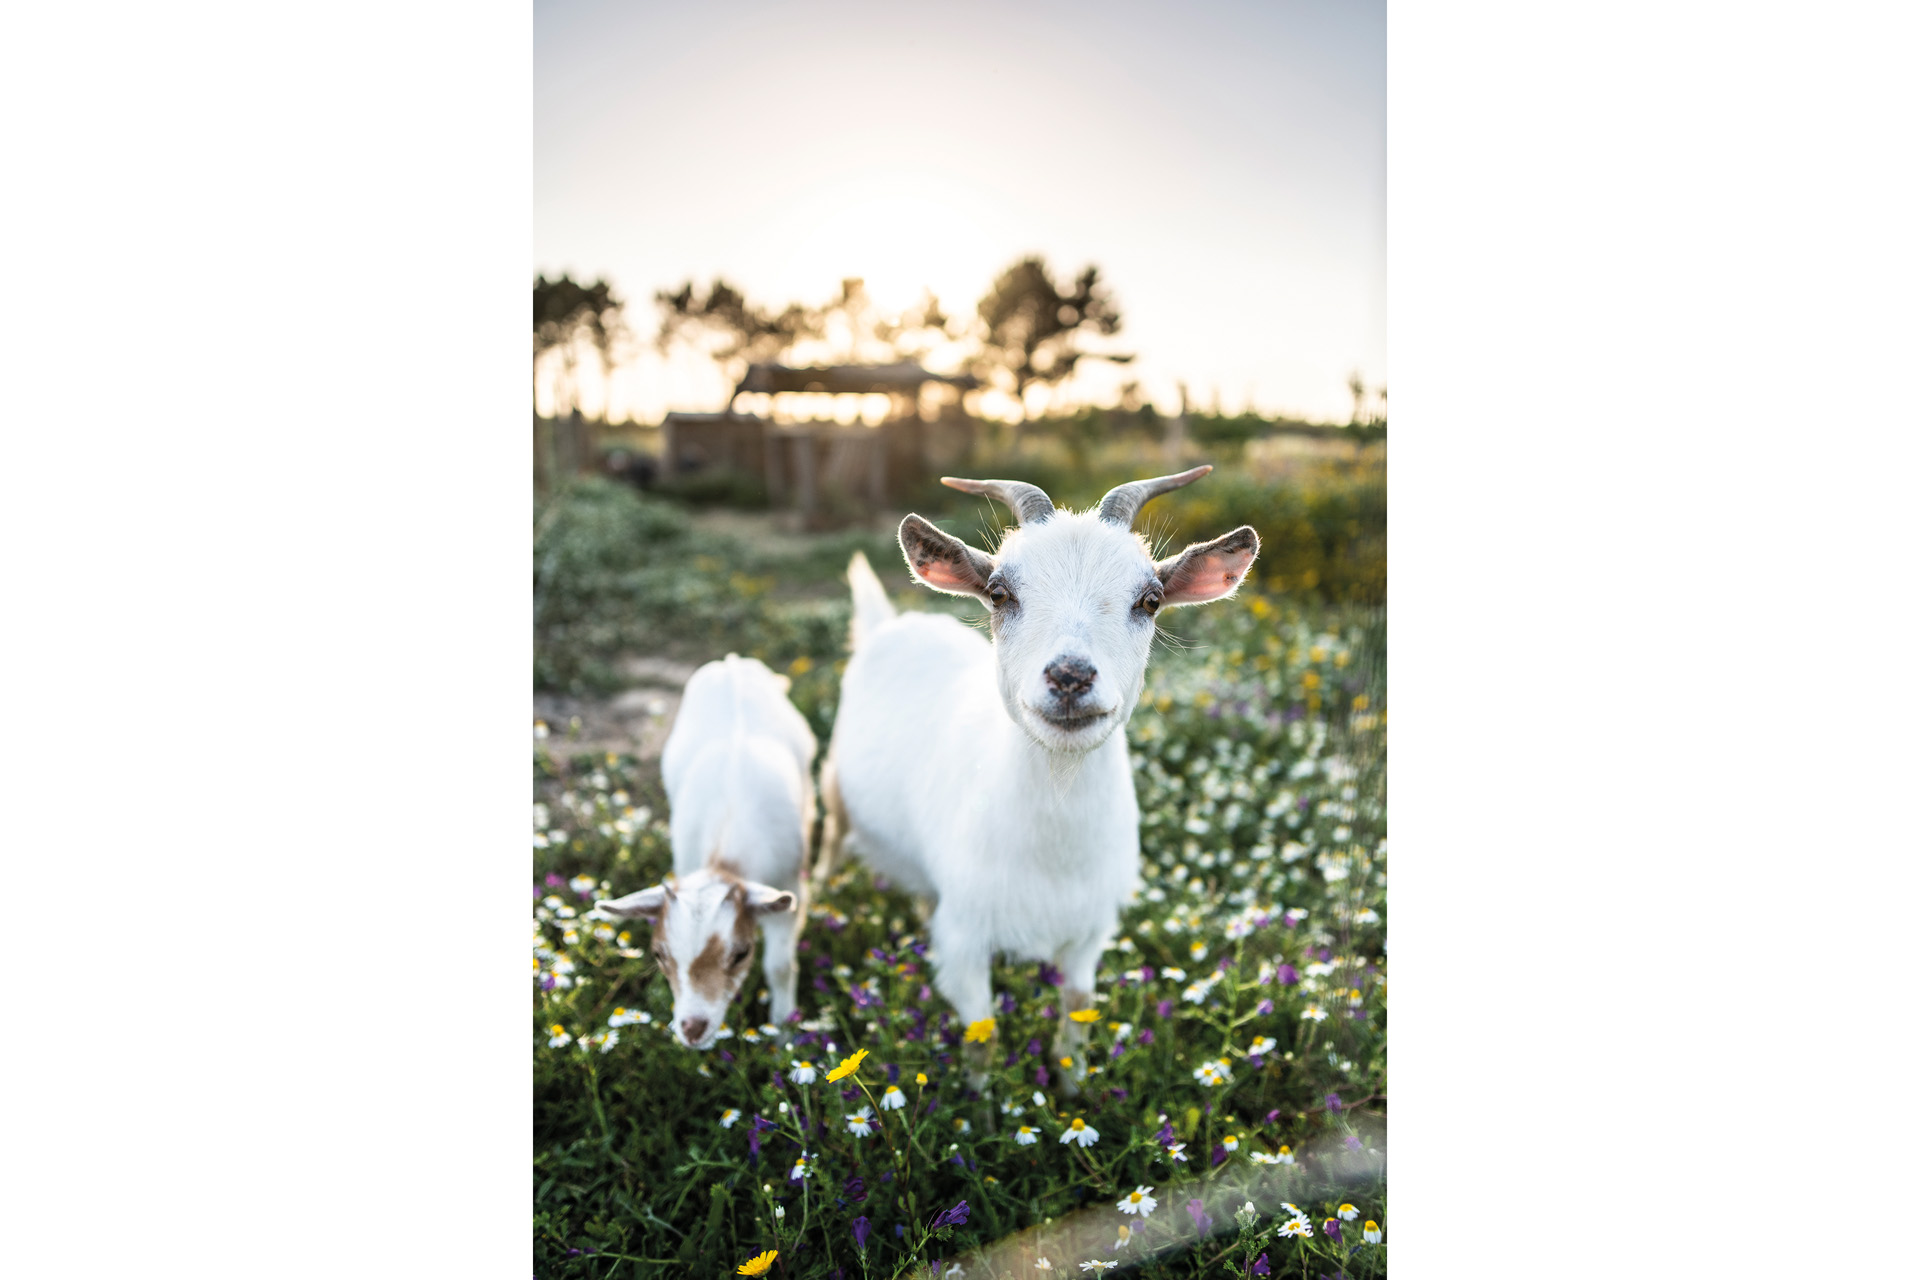 Two white goats in a field